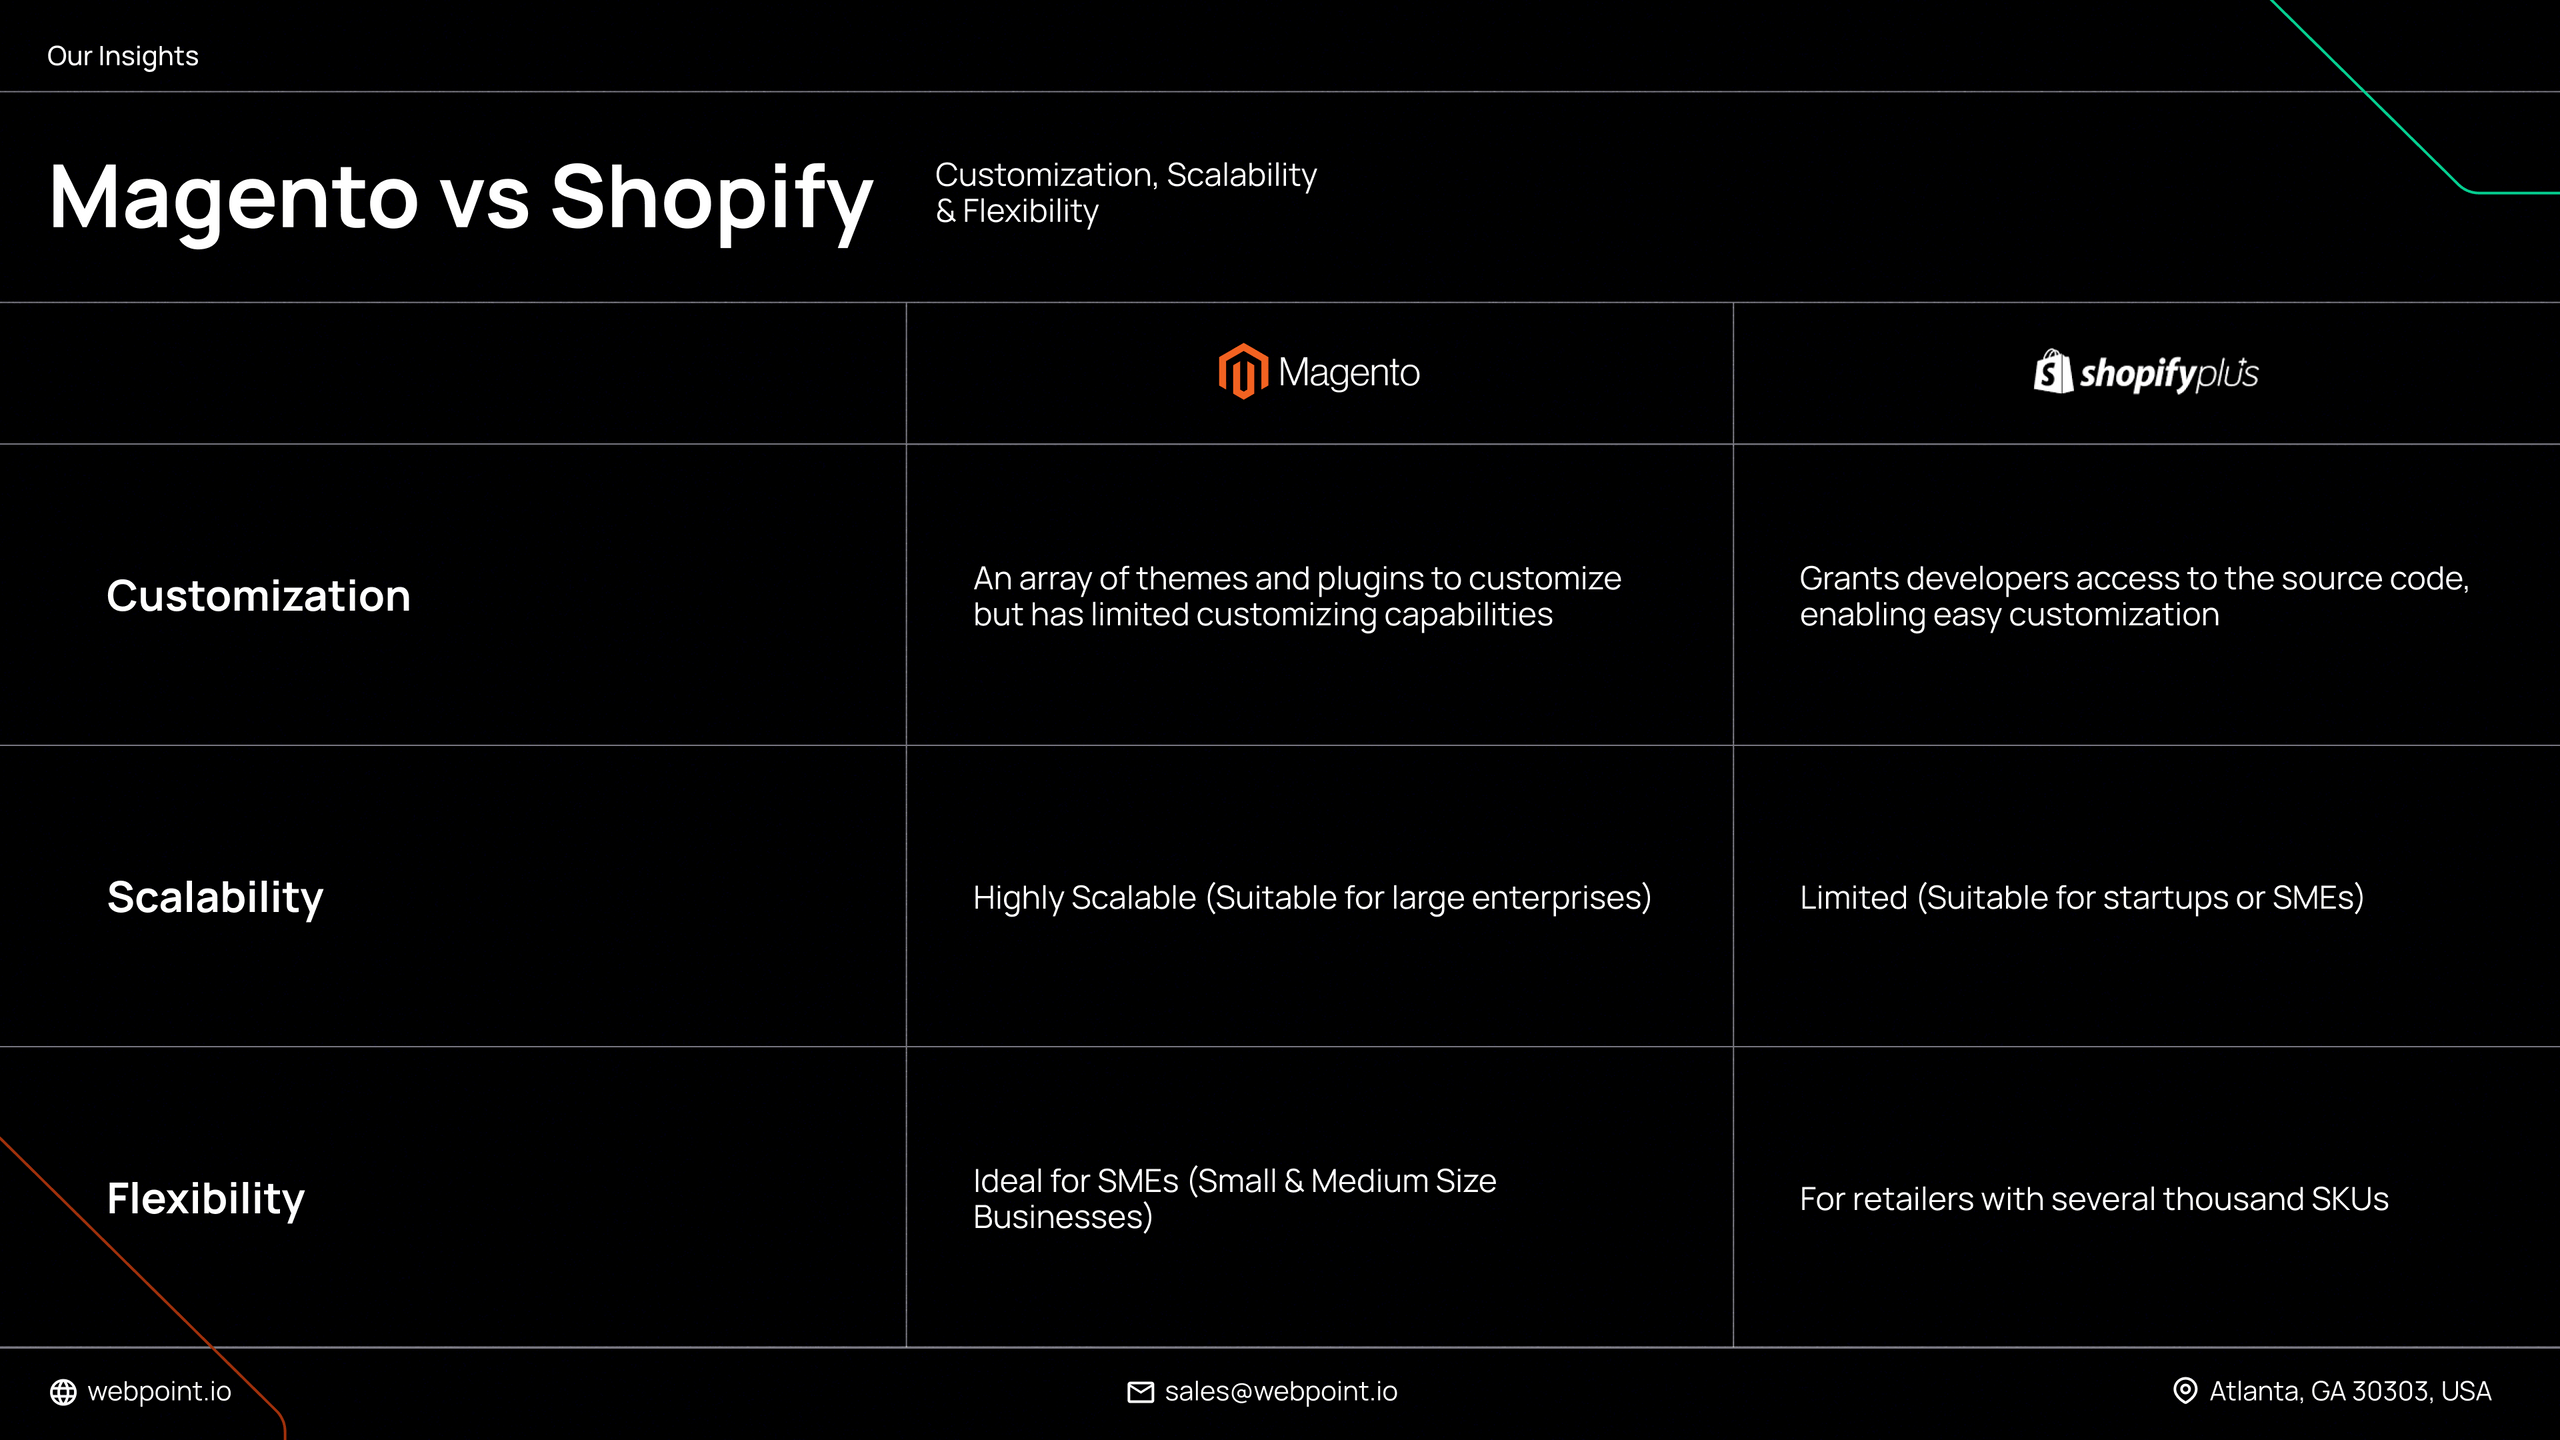 Magent vs Shopify Plus based on Customization, Scalability, and Flexibility